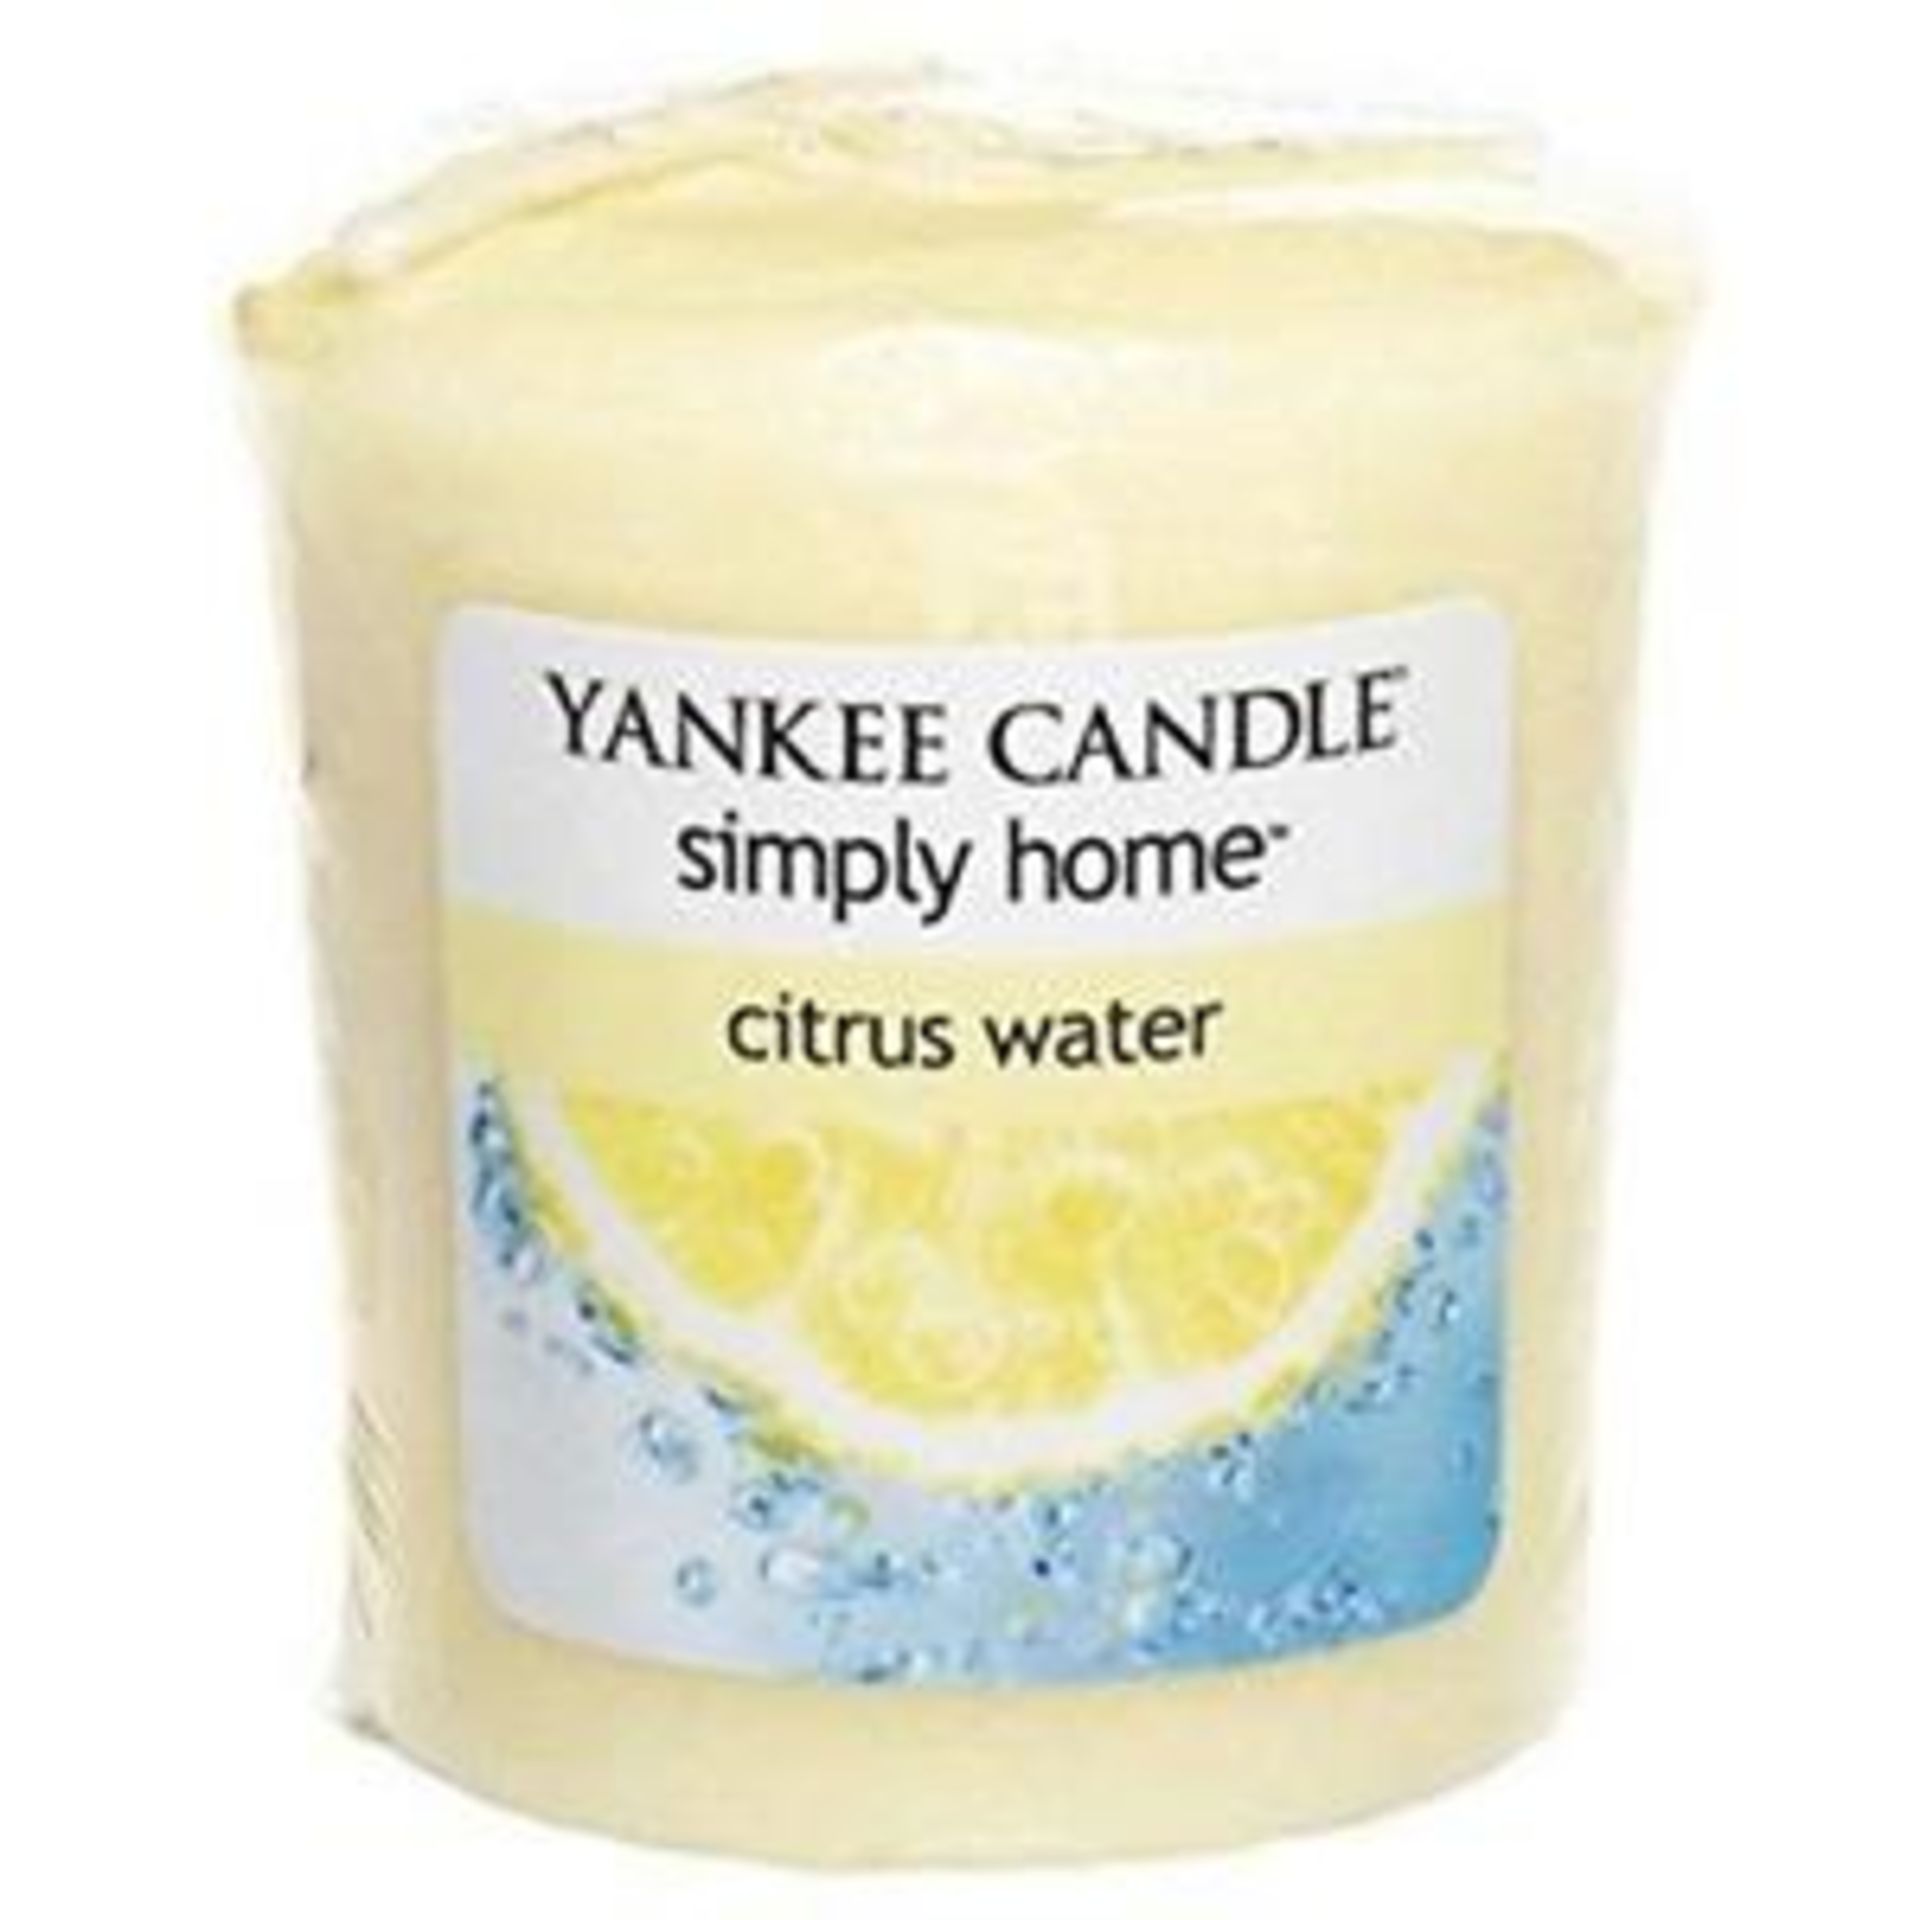 V Brand New 18 x Yankee Candle Votive Citrus Water 49g RRP £107.82 X 2 YOUR BID PRICE TO BE - Image 2 of 2